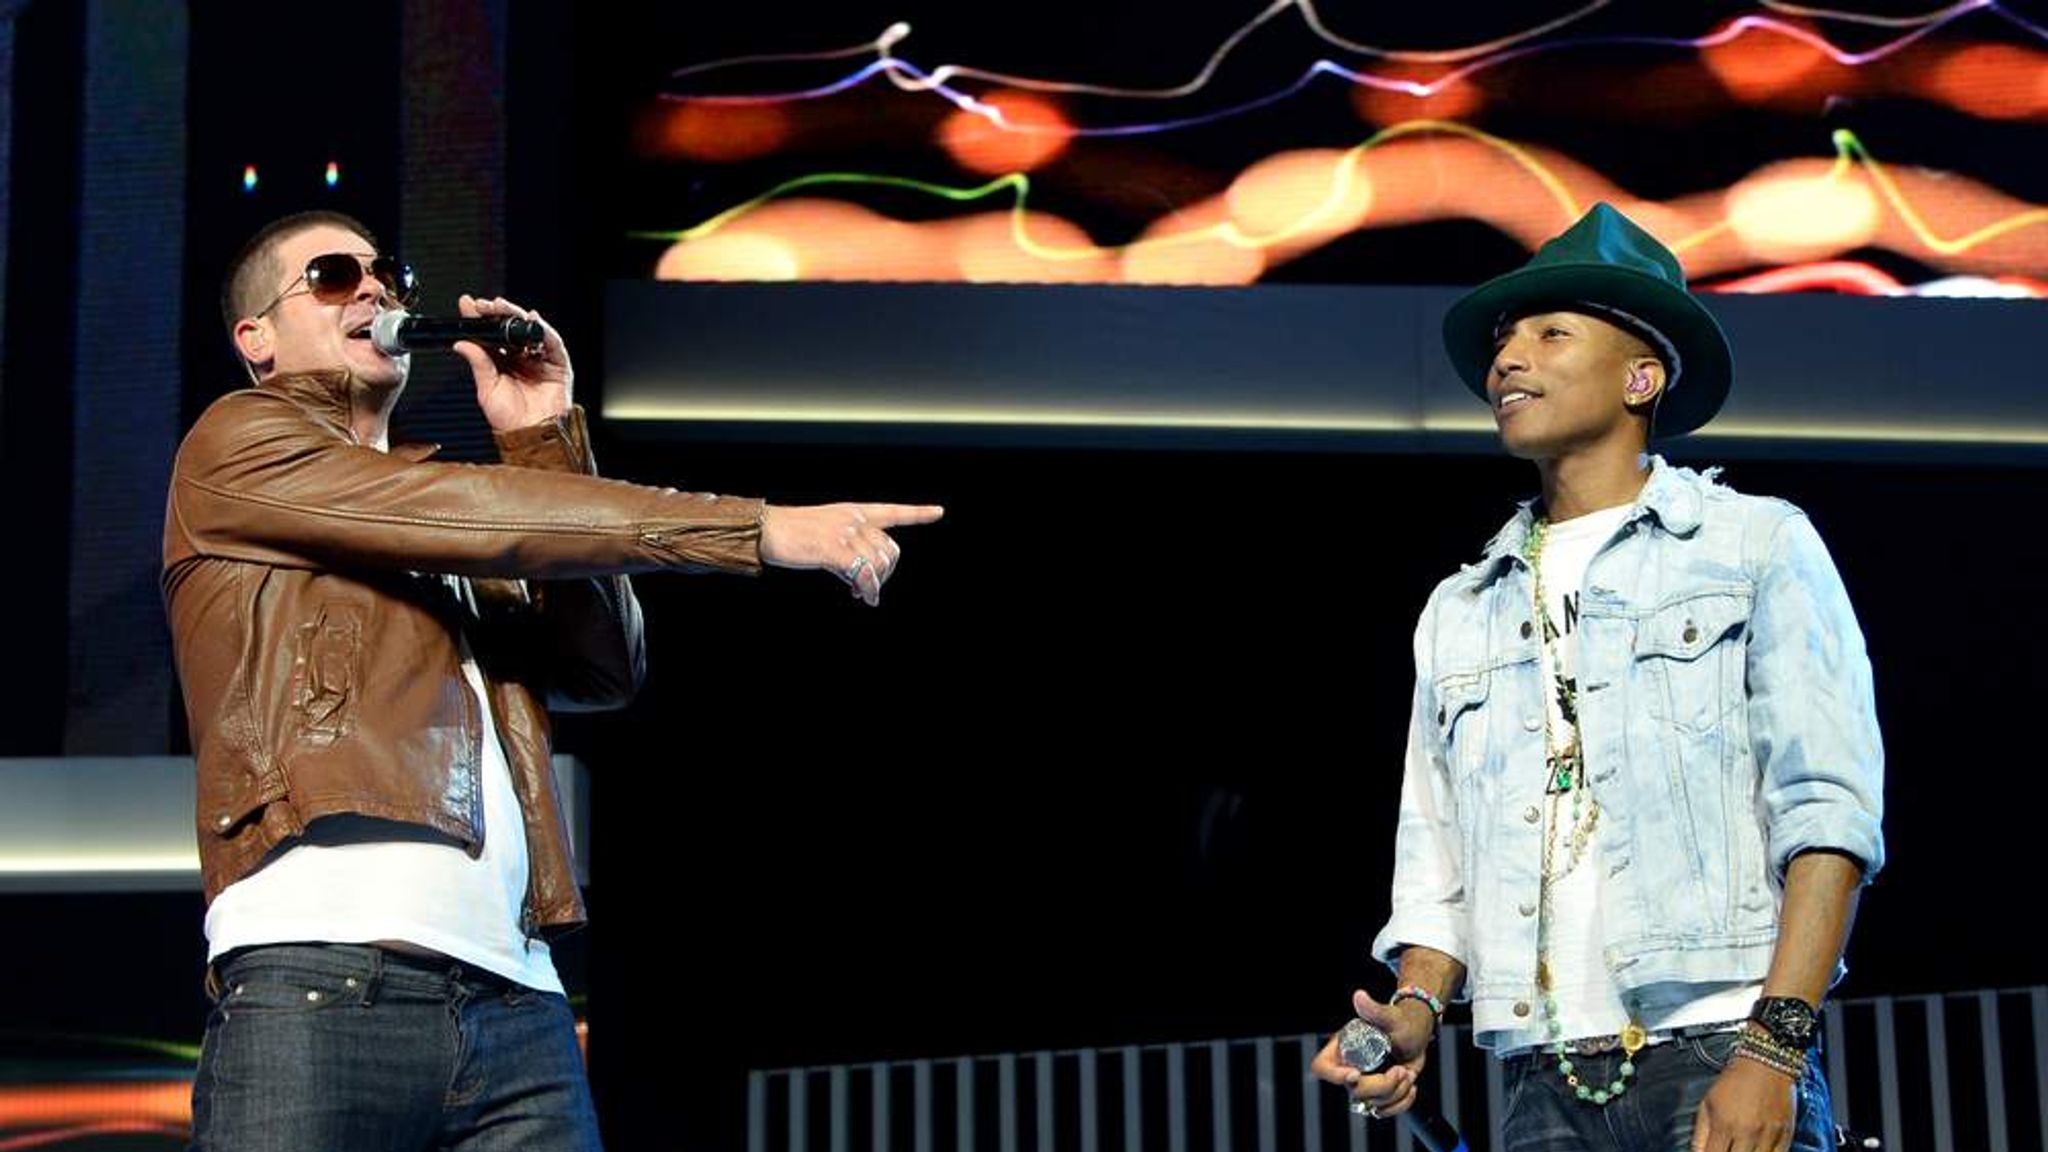 Pharrell Williams: I did not copy Marvin Gaye's work